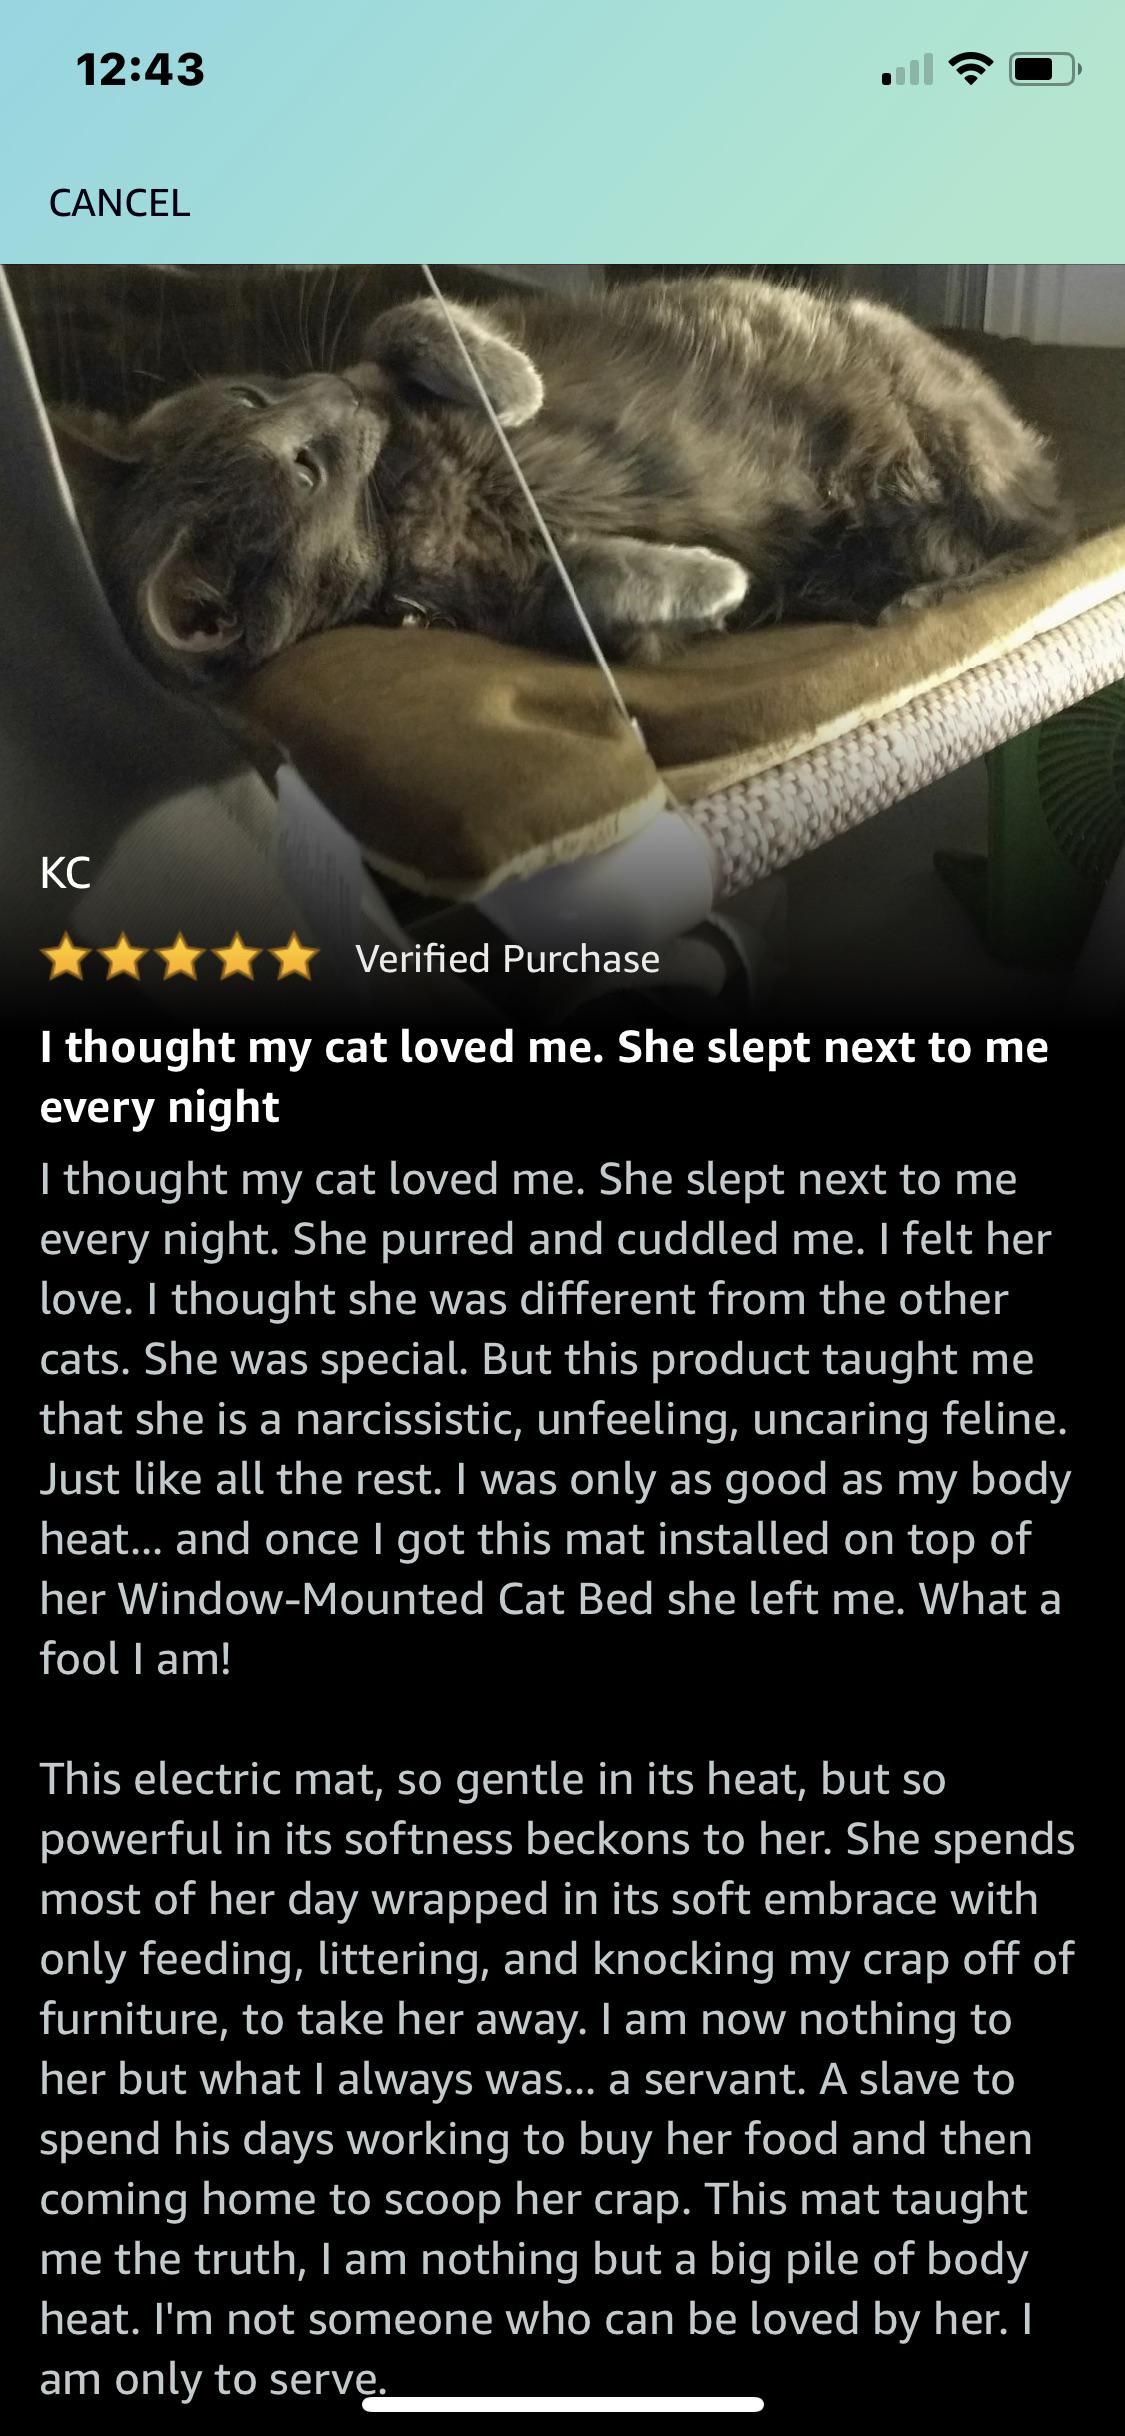 This customer’s review